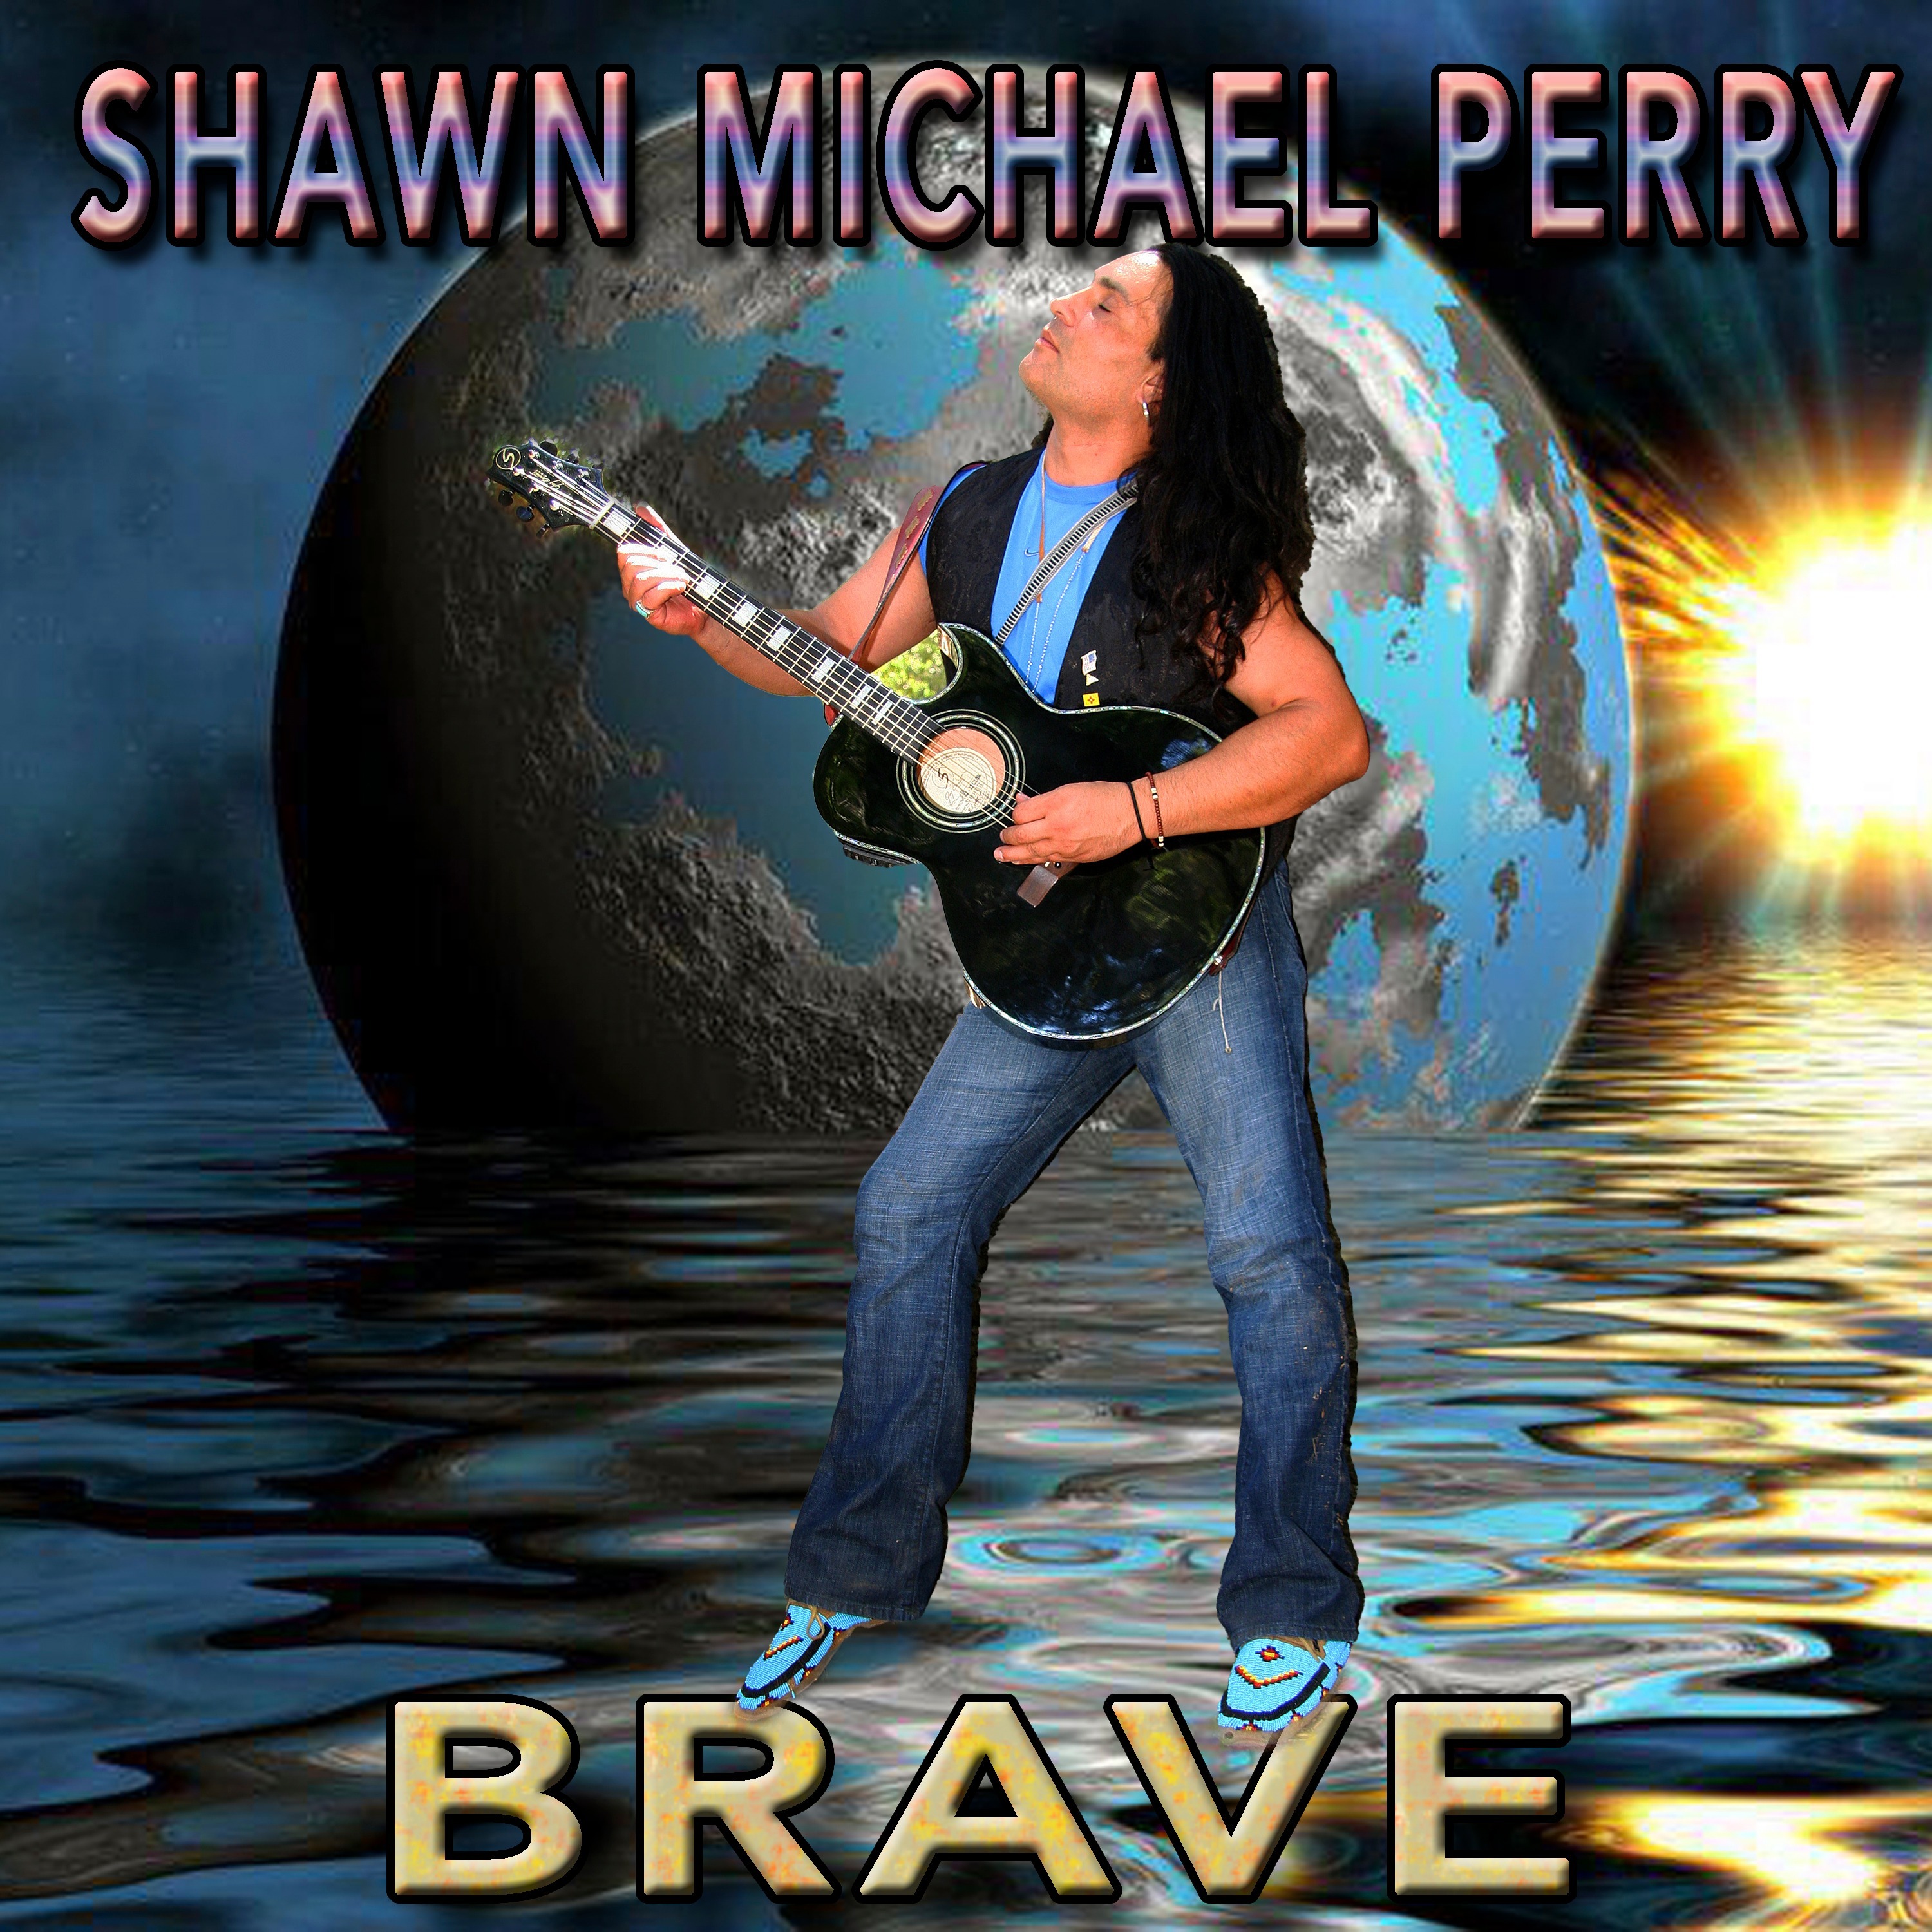 Shawn Michael Perry’s New Album "Brave" Takes A Bold New Step In The World Of Rock